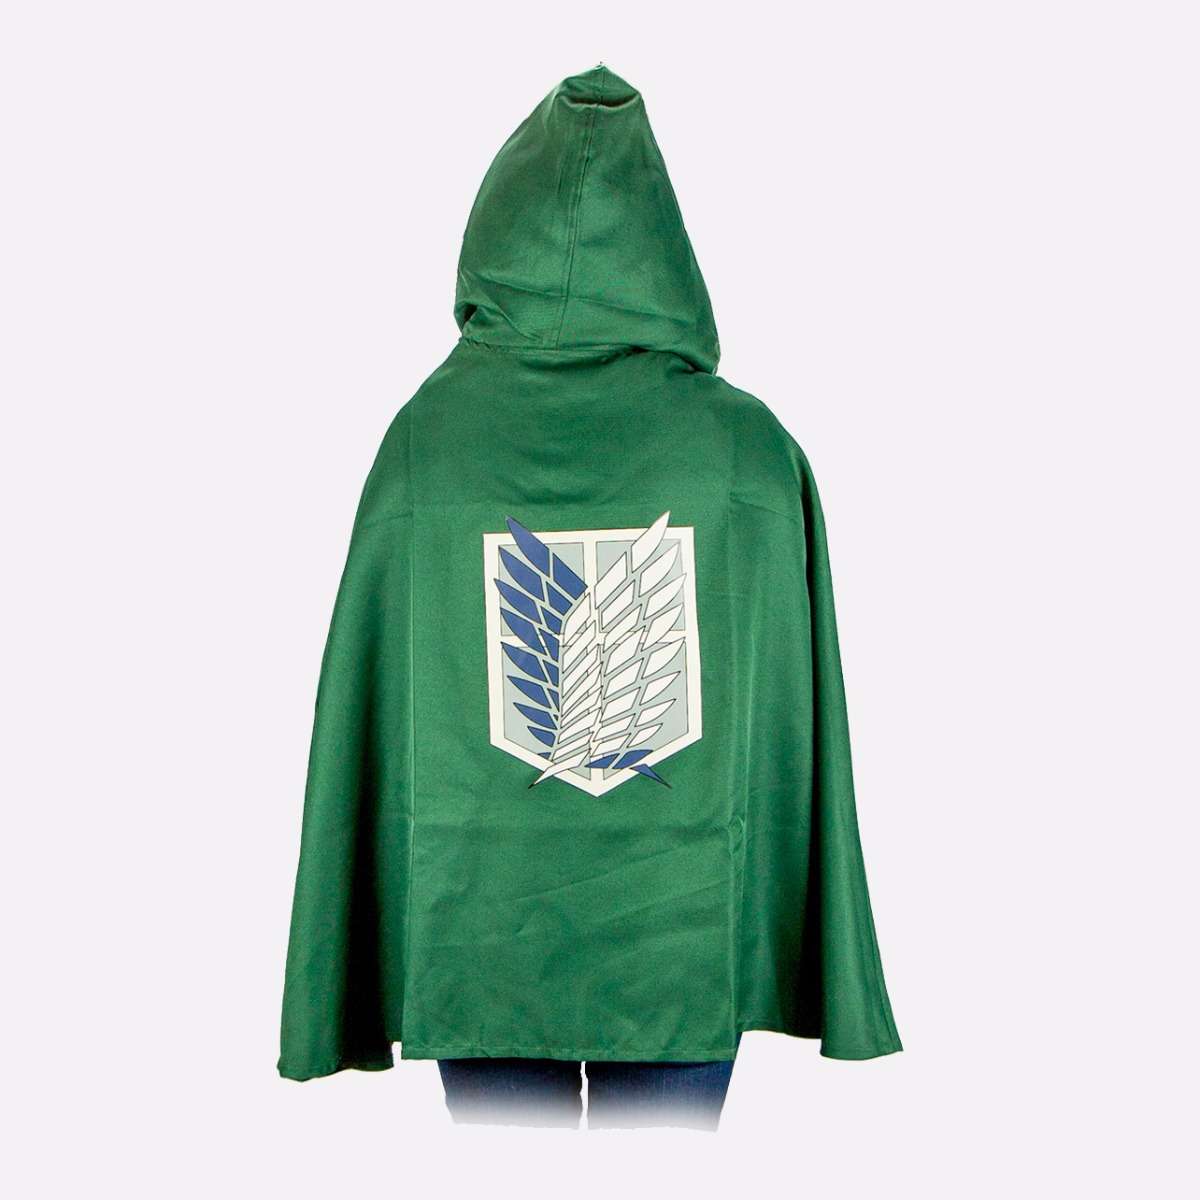 Shop Attack on Titan Scouting Legion Hooded Cloak | Funimation